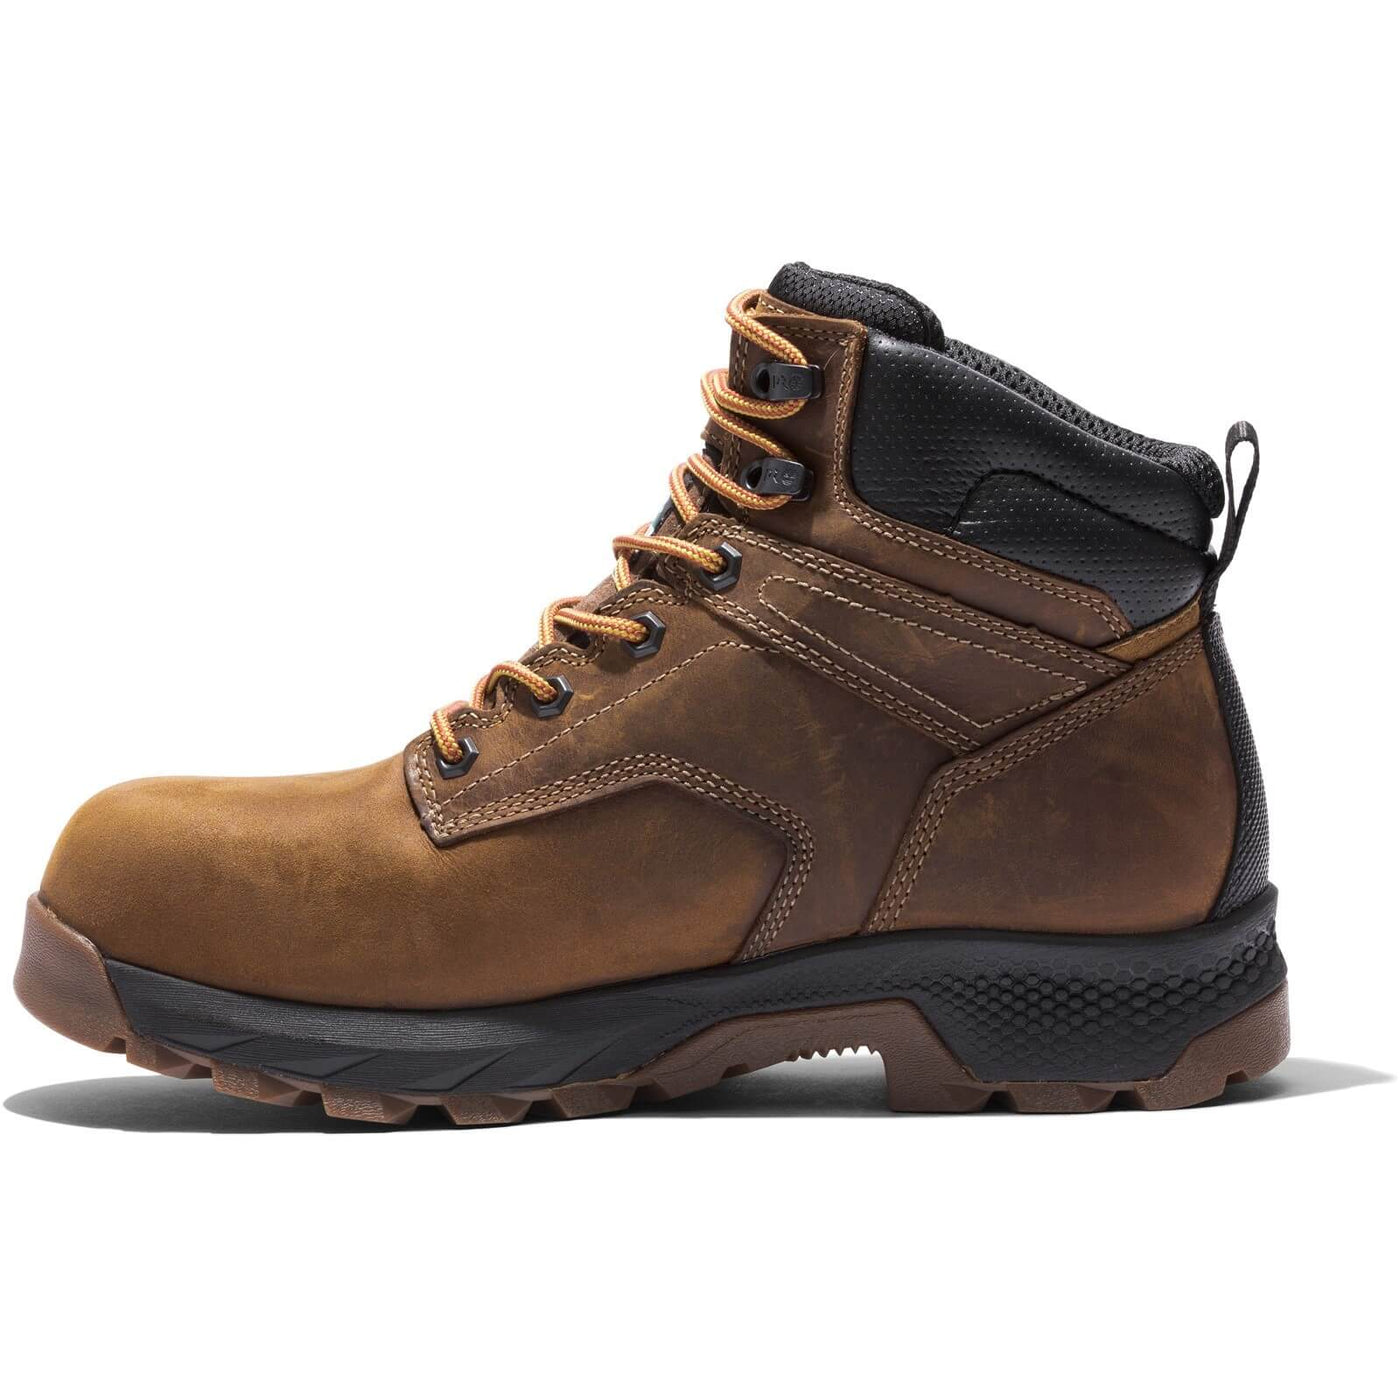 Timberland Pro Titan 6 Inch Lightweight Waterproof S3 Safety Boots Brown 6#colour_brown